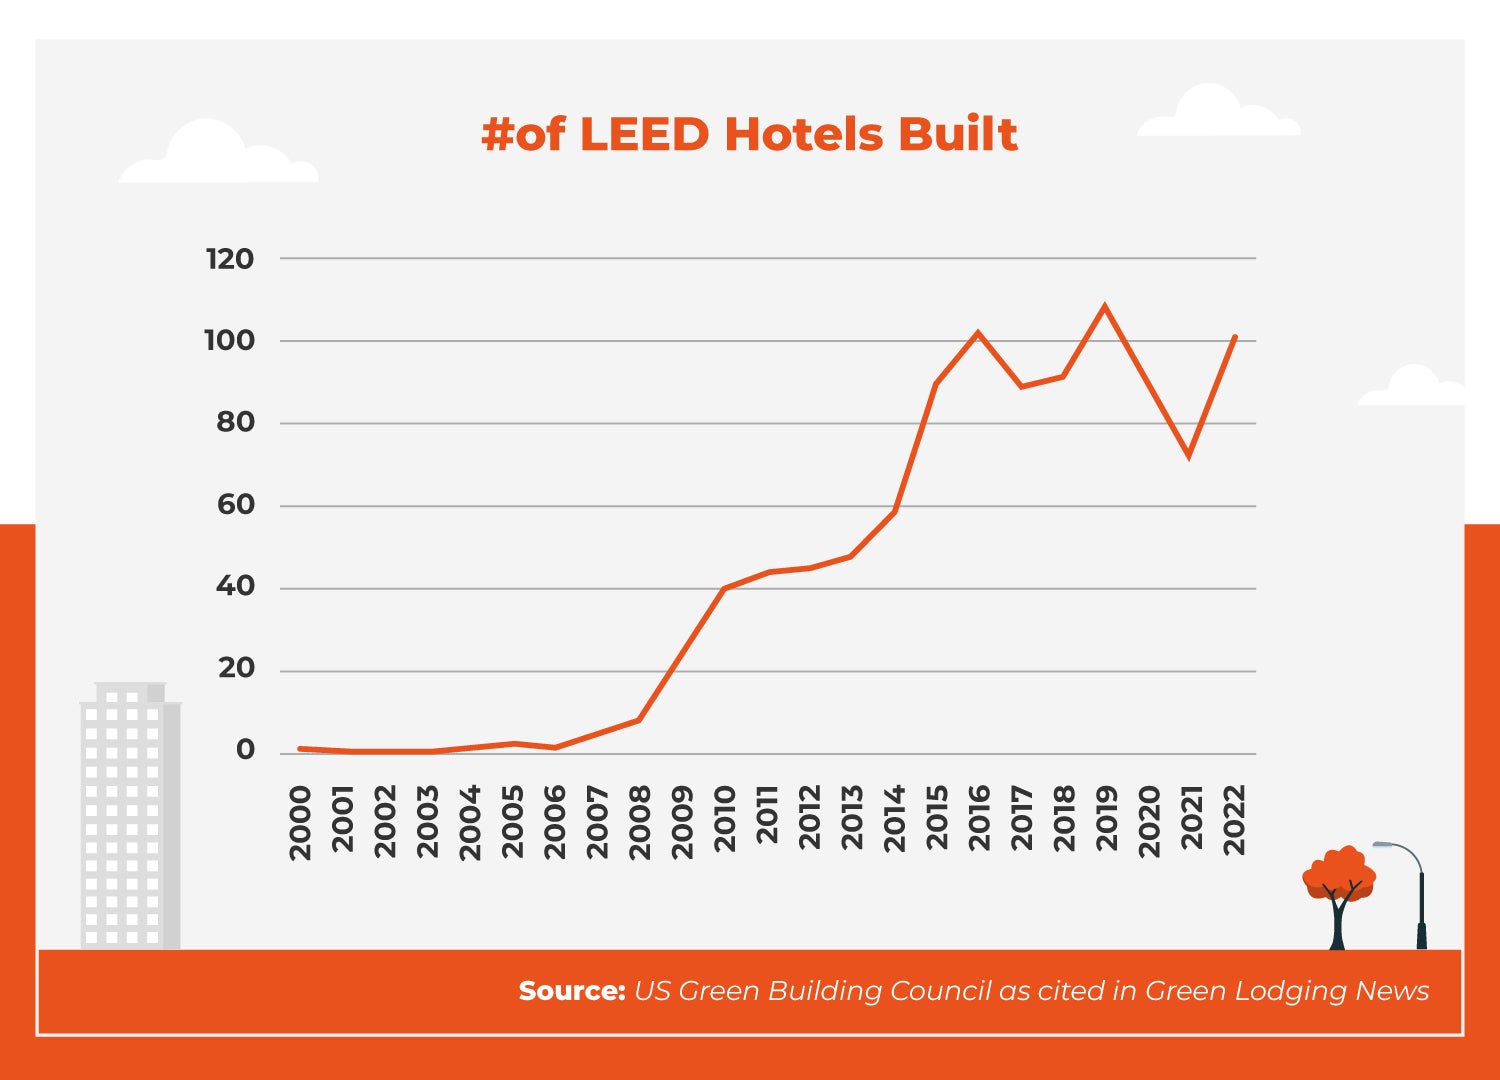 Char showing LEED hotels built historically